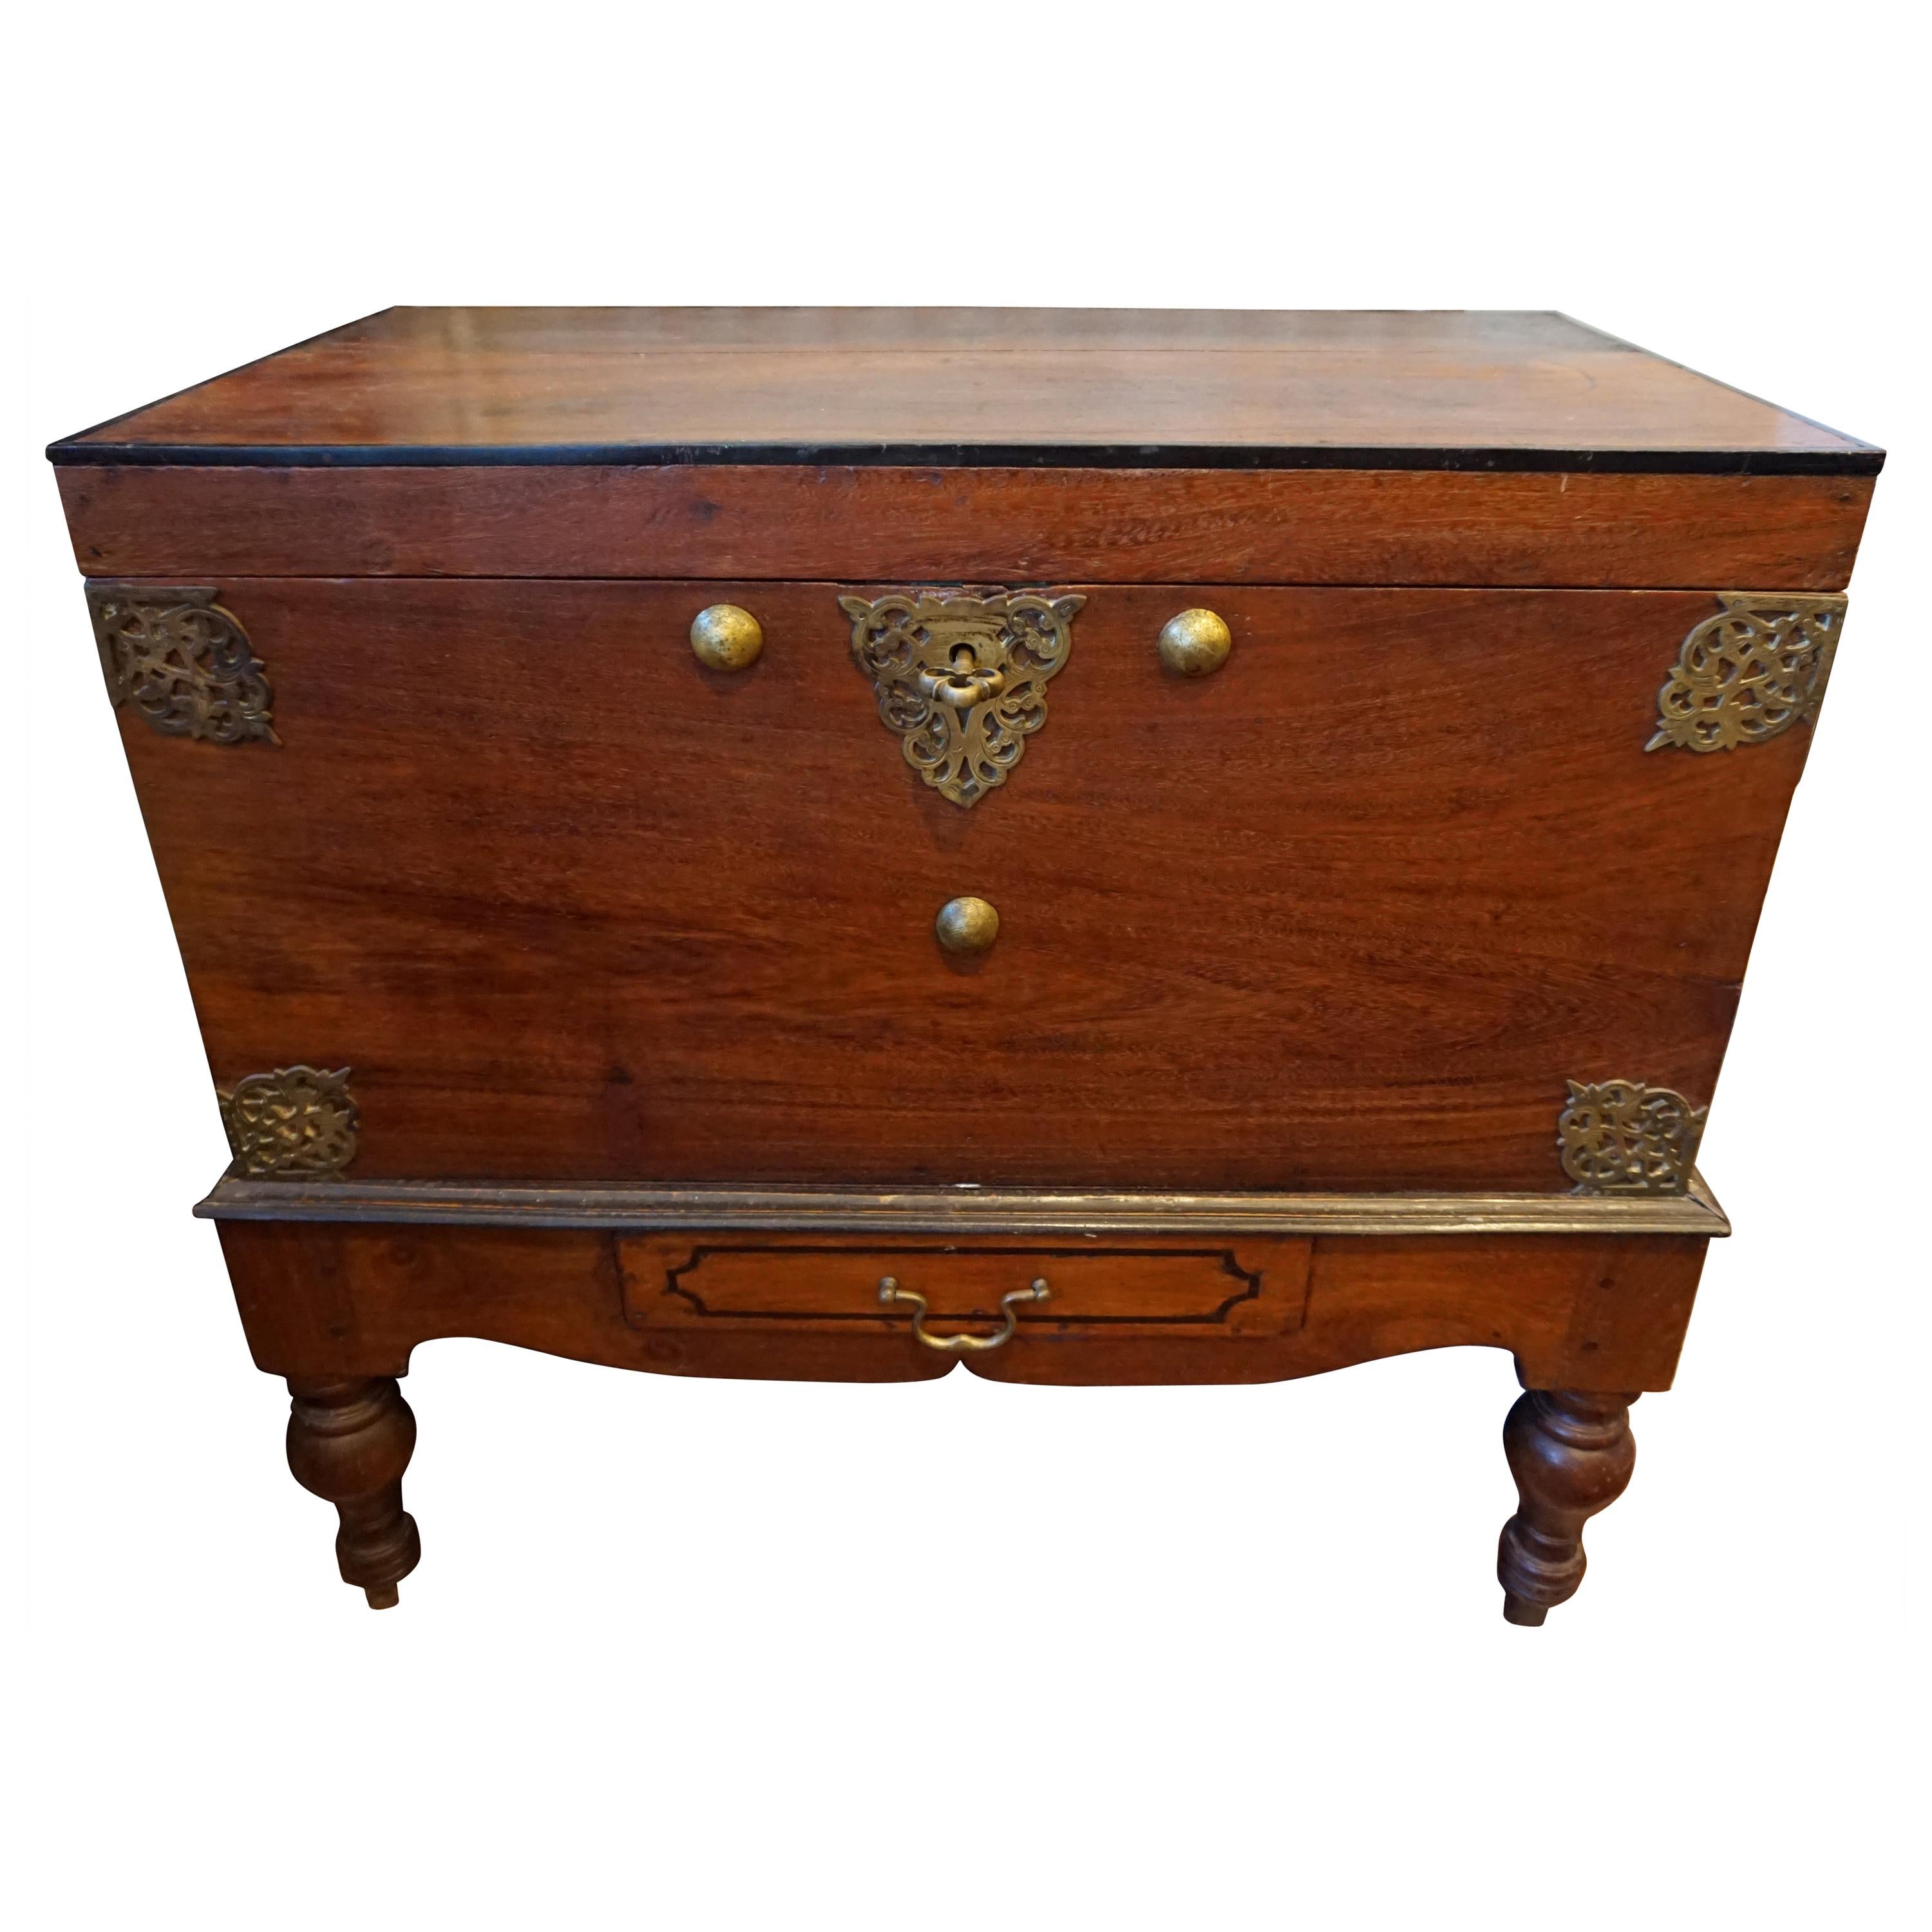 19th Century Dutch Colonial Mahogany Chest on Stand with Brass Hardware and Key